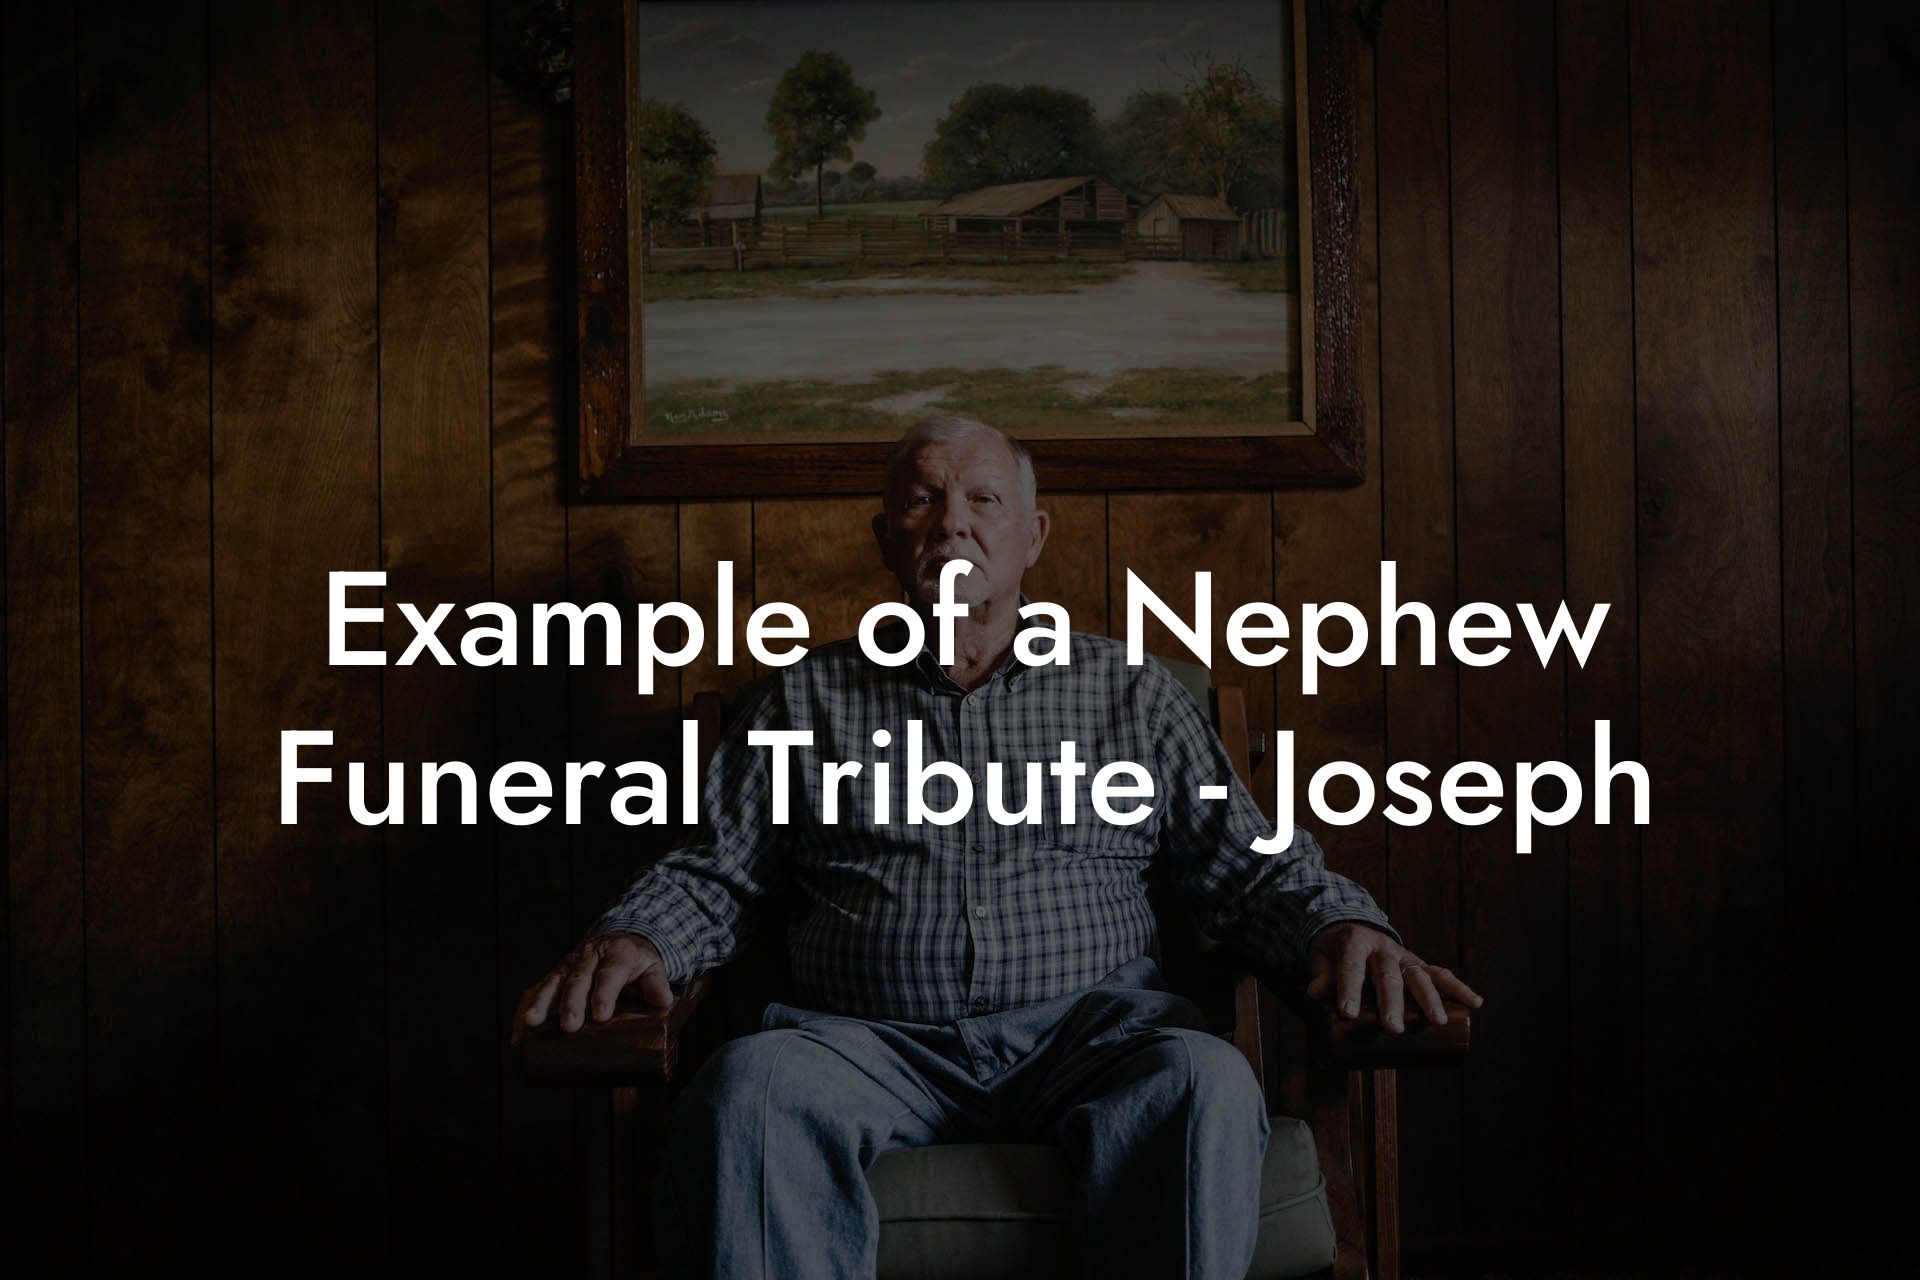 Example of a Nephew Funeral Tribute - Joseph